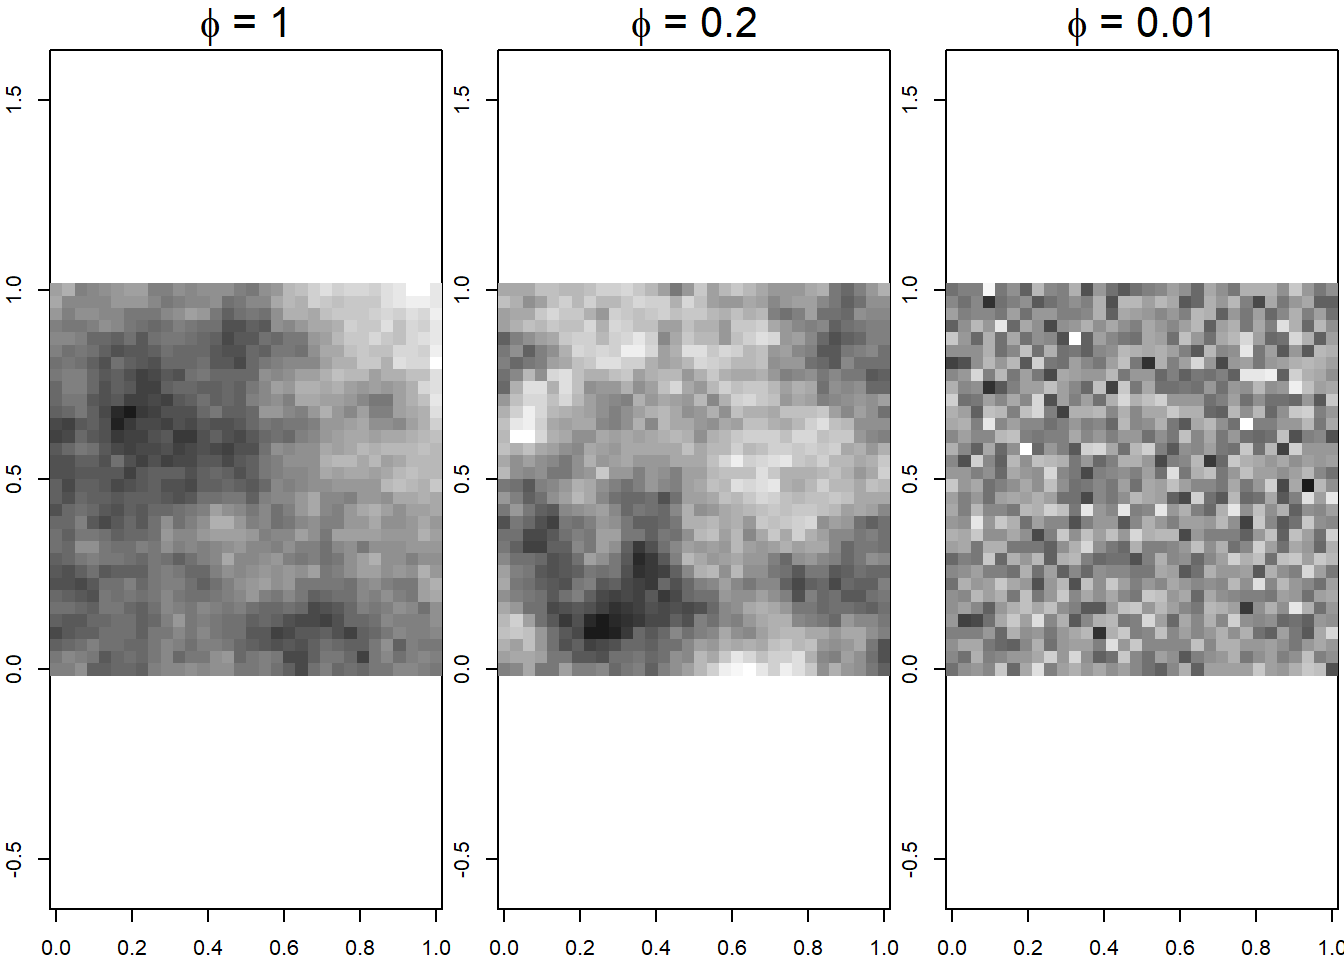 Covariance functions (top) and realizations of Gaussian random fields (bottom) for several parameter values.